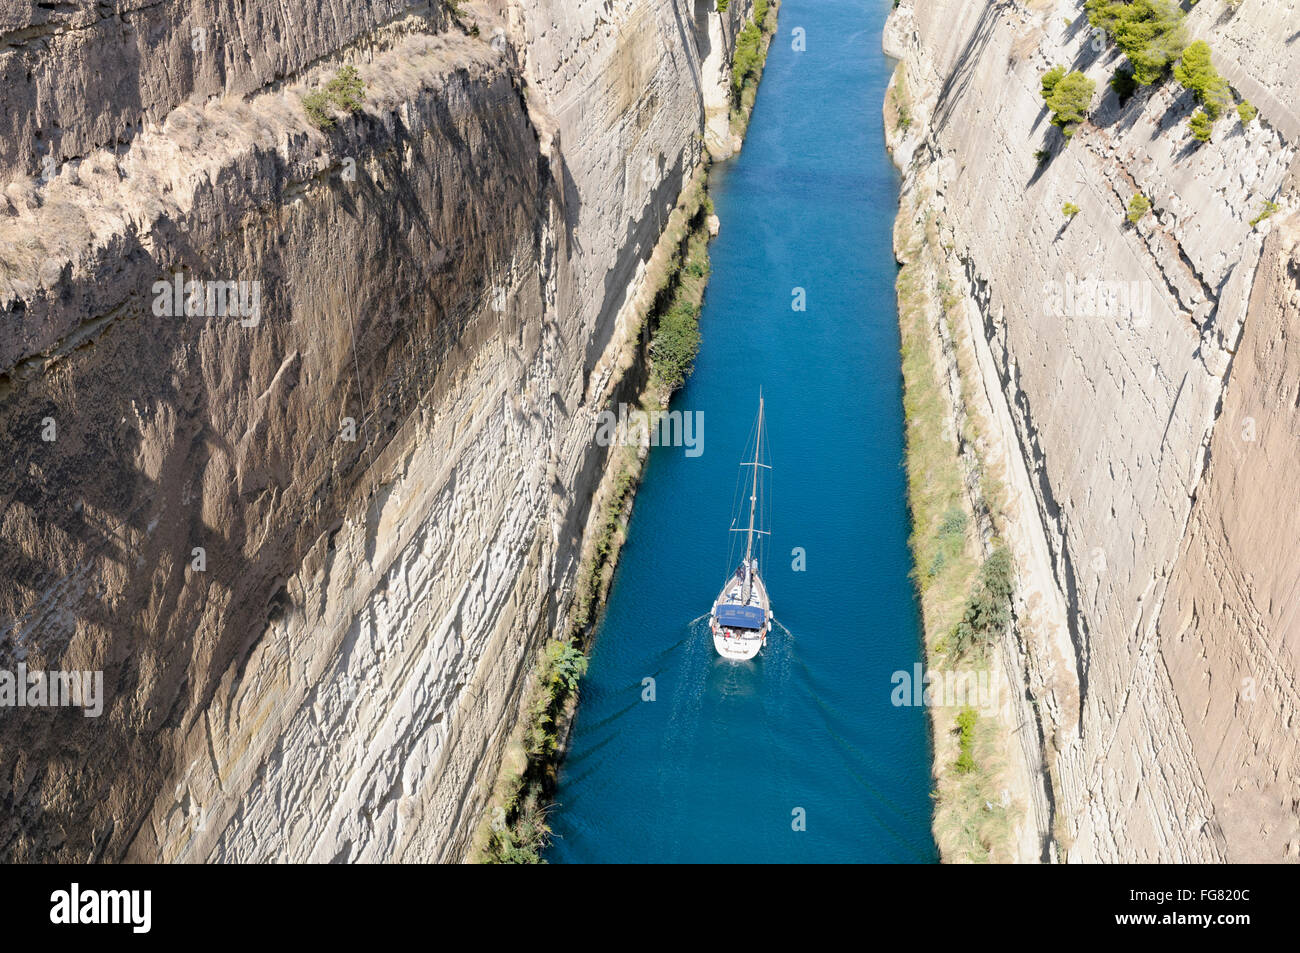 A yacht passing through the Corinth Canal, Greece Stock Photo